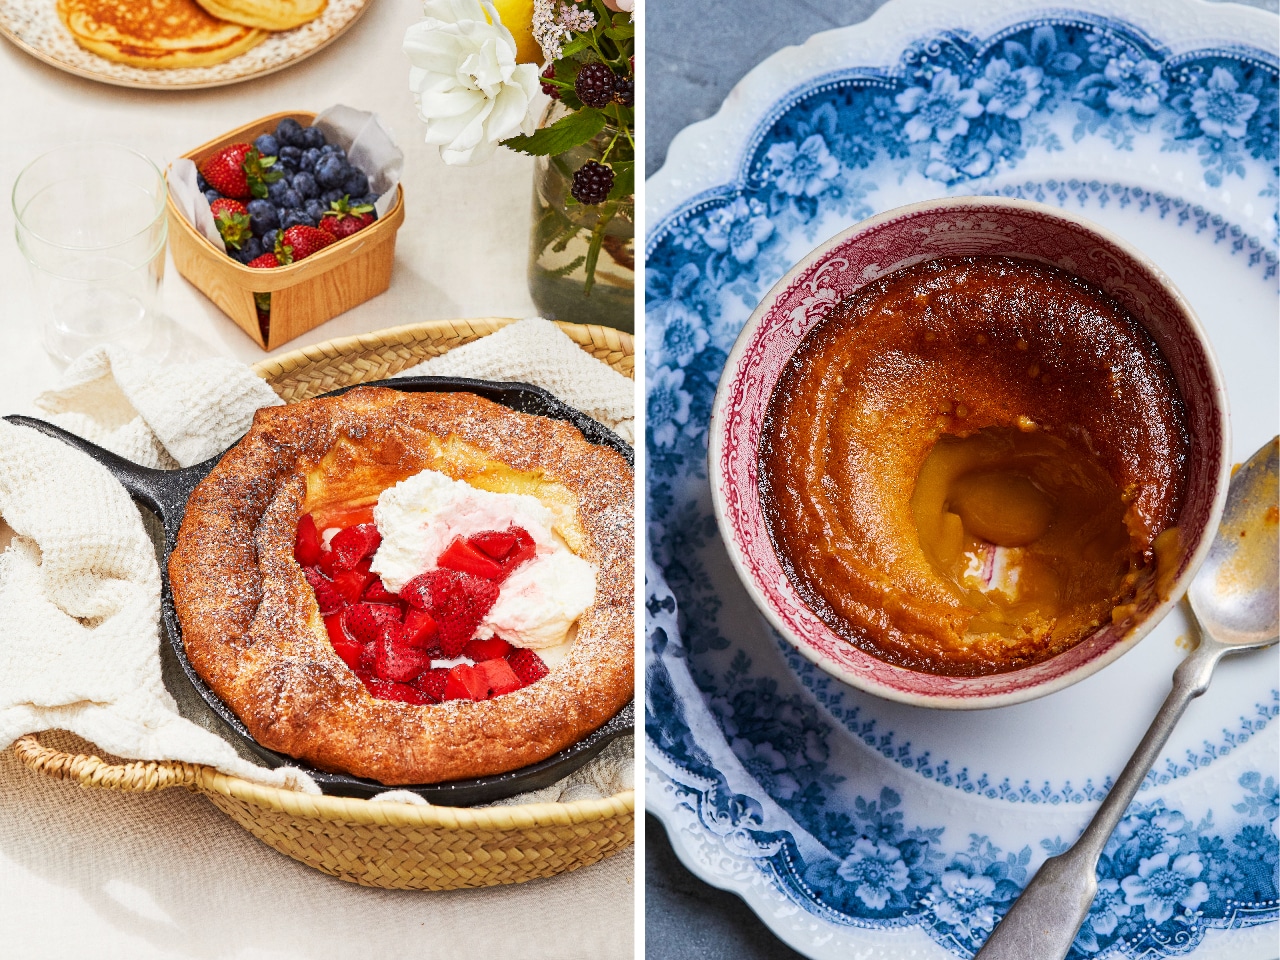 A side-by-side photo of Gemma Stafford's 10-Ingredient Dutch Baby Pancake next to Dulce De Leche Lava Cake from her new cookbook, "Bigger Bolder Baking Every Day."